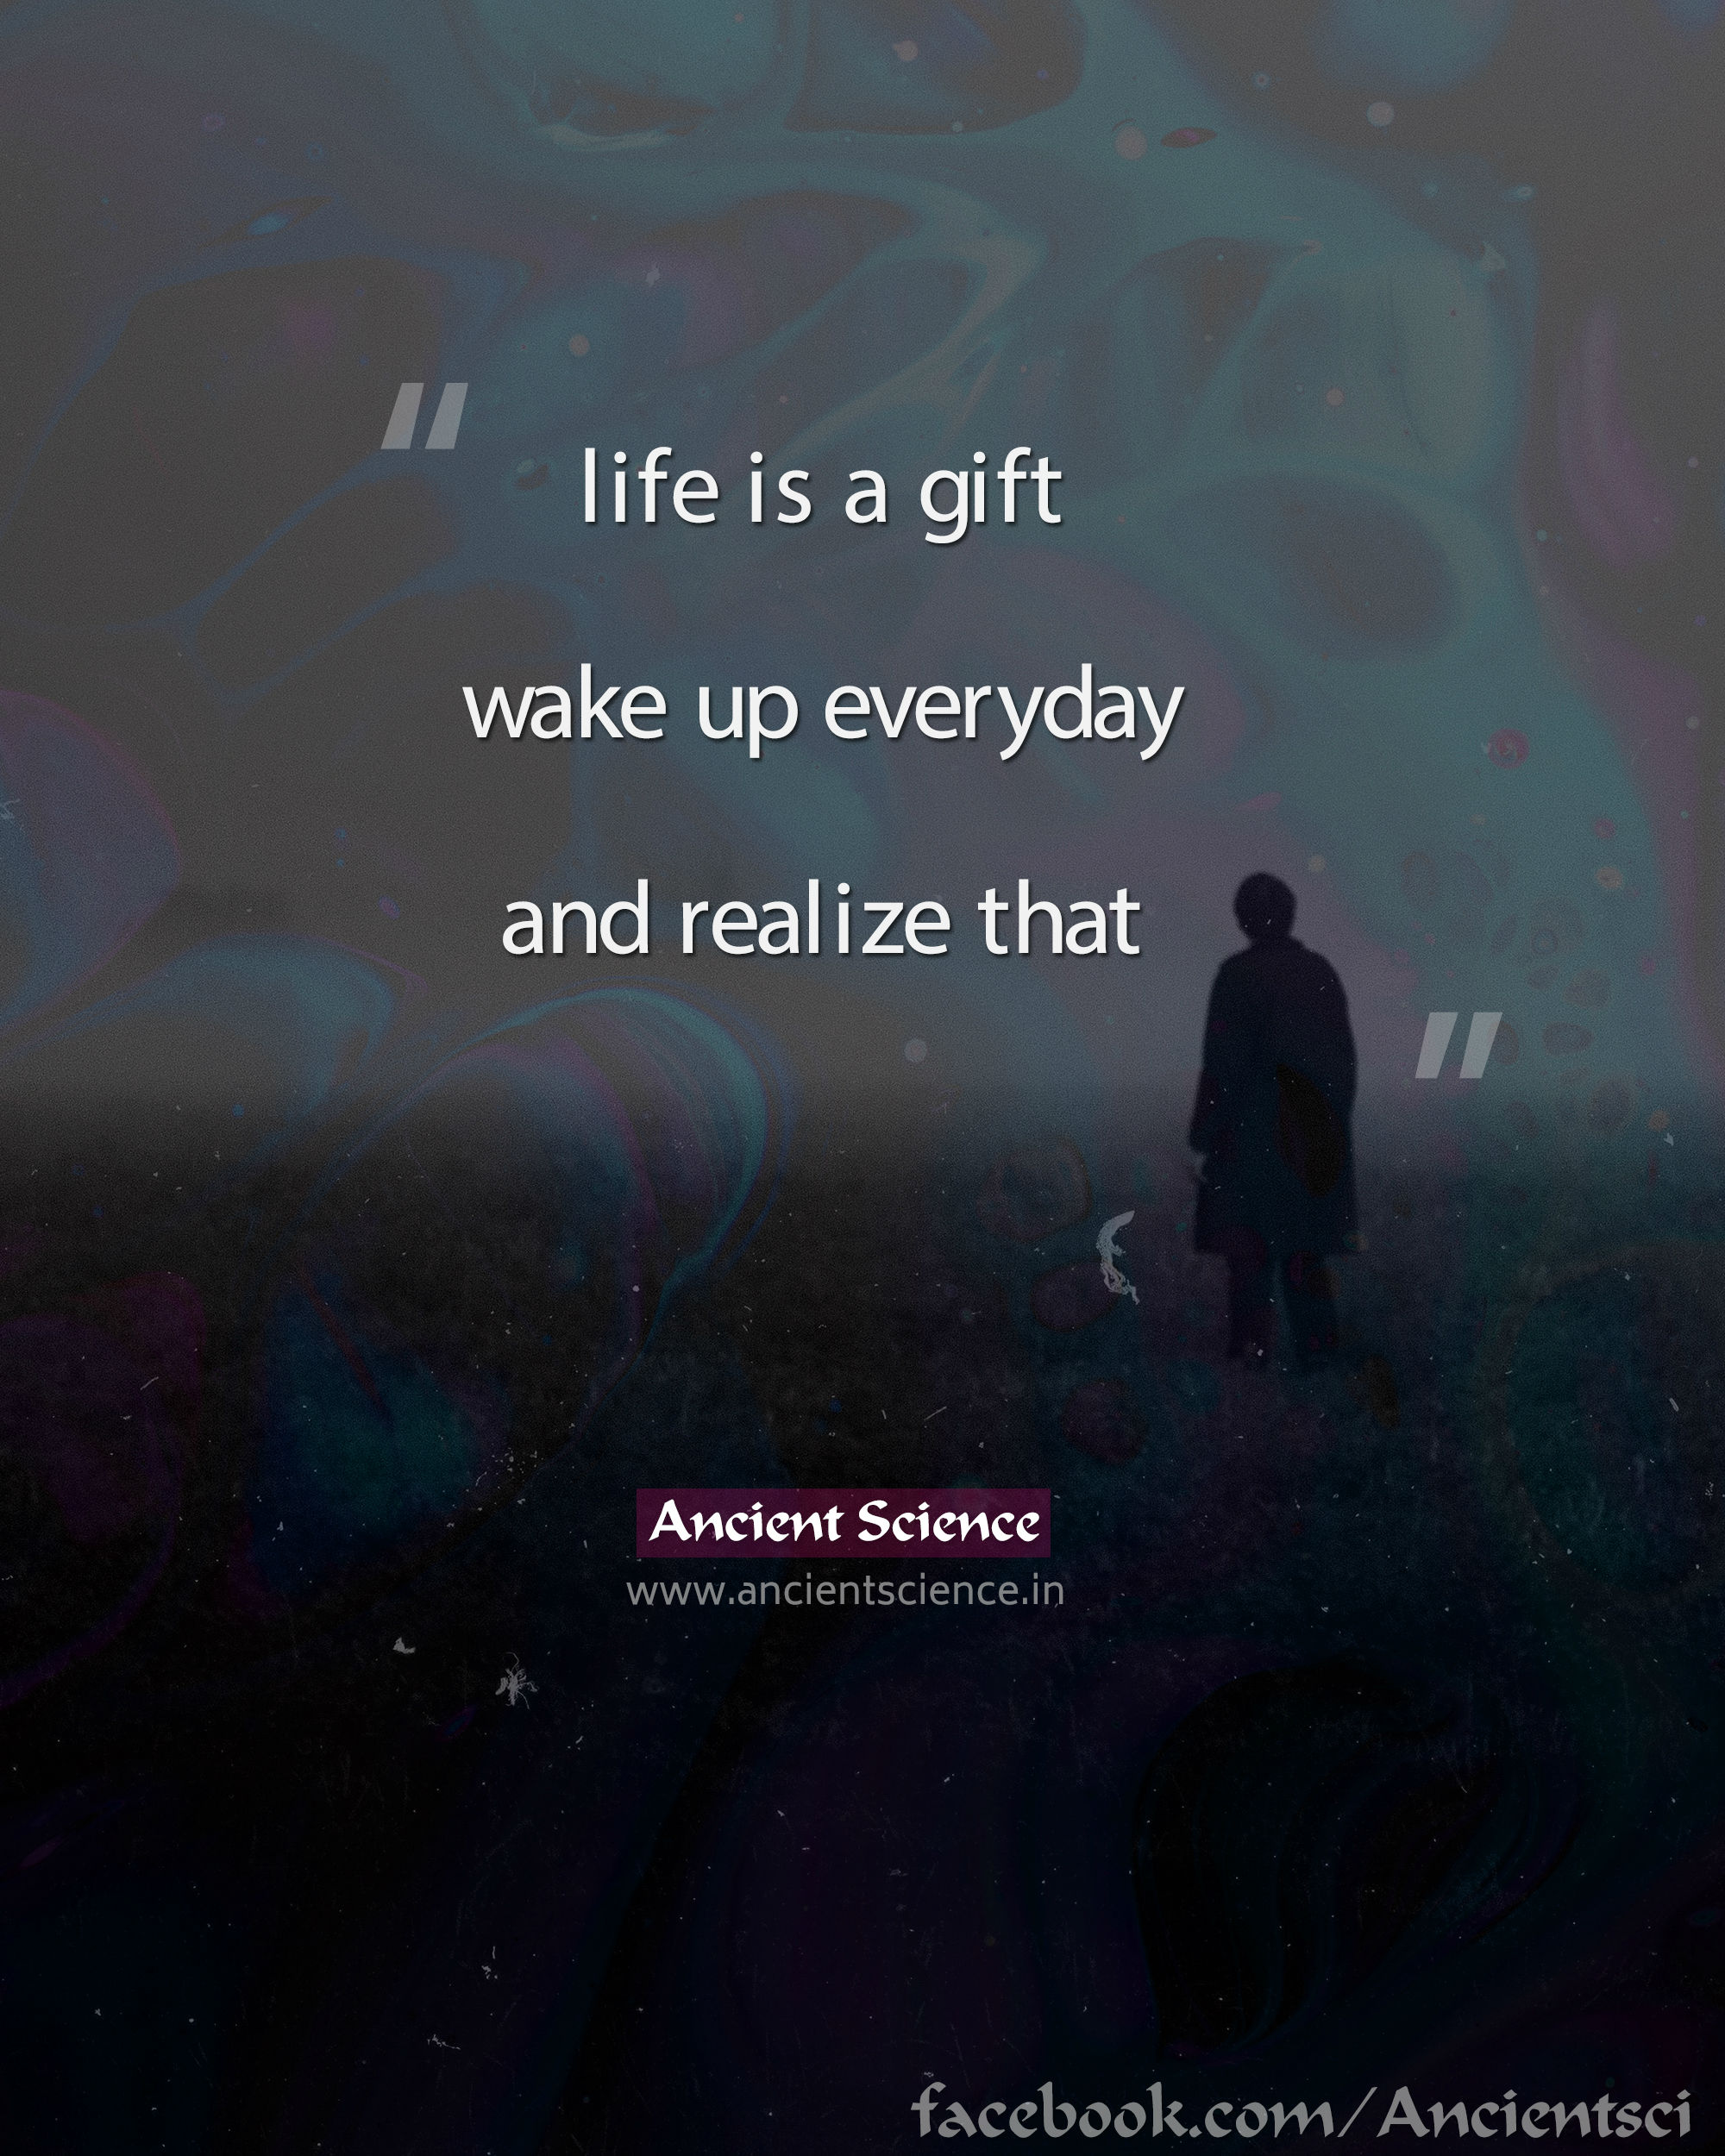 Life is a gift, wake up everyday and realize that